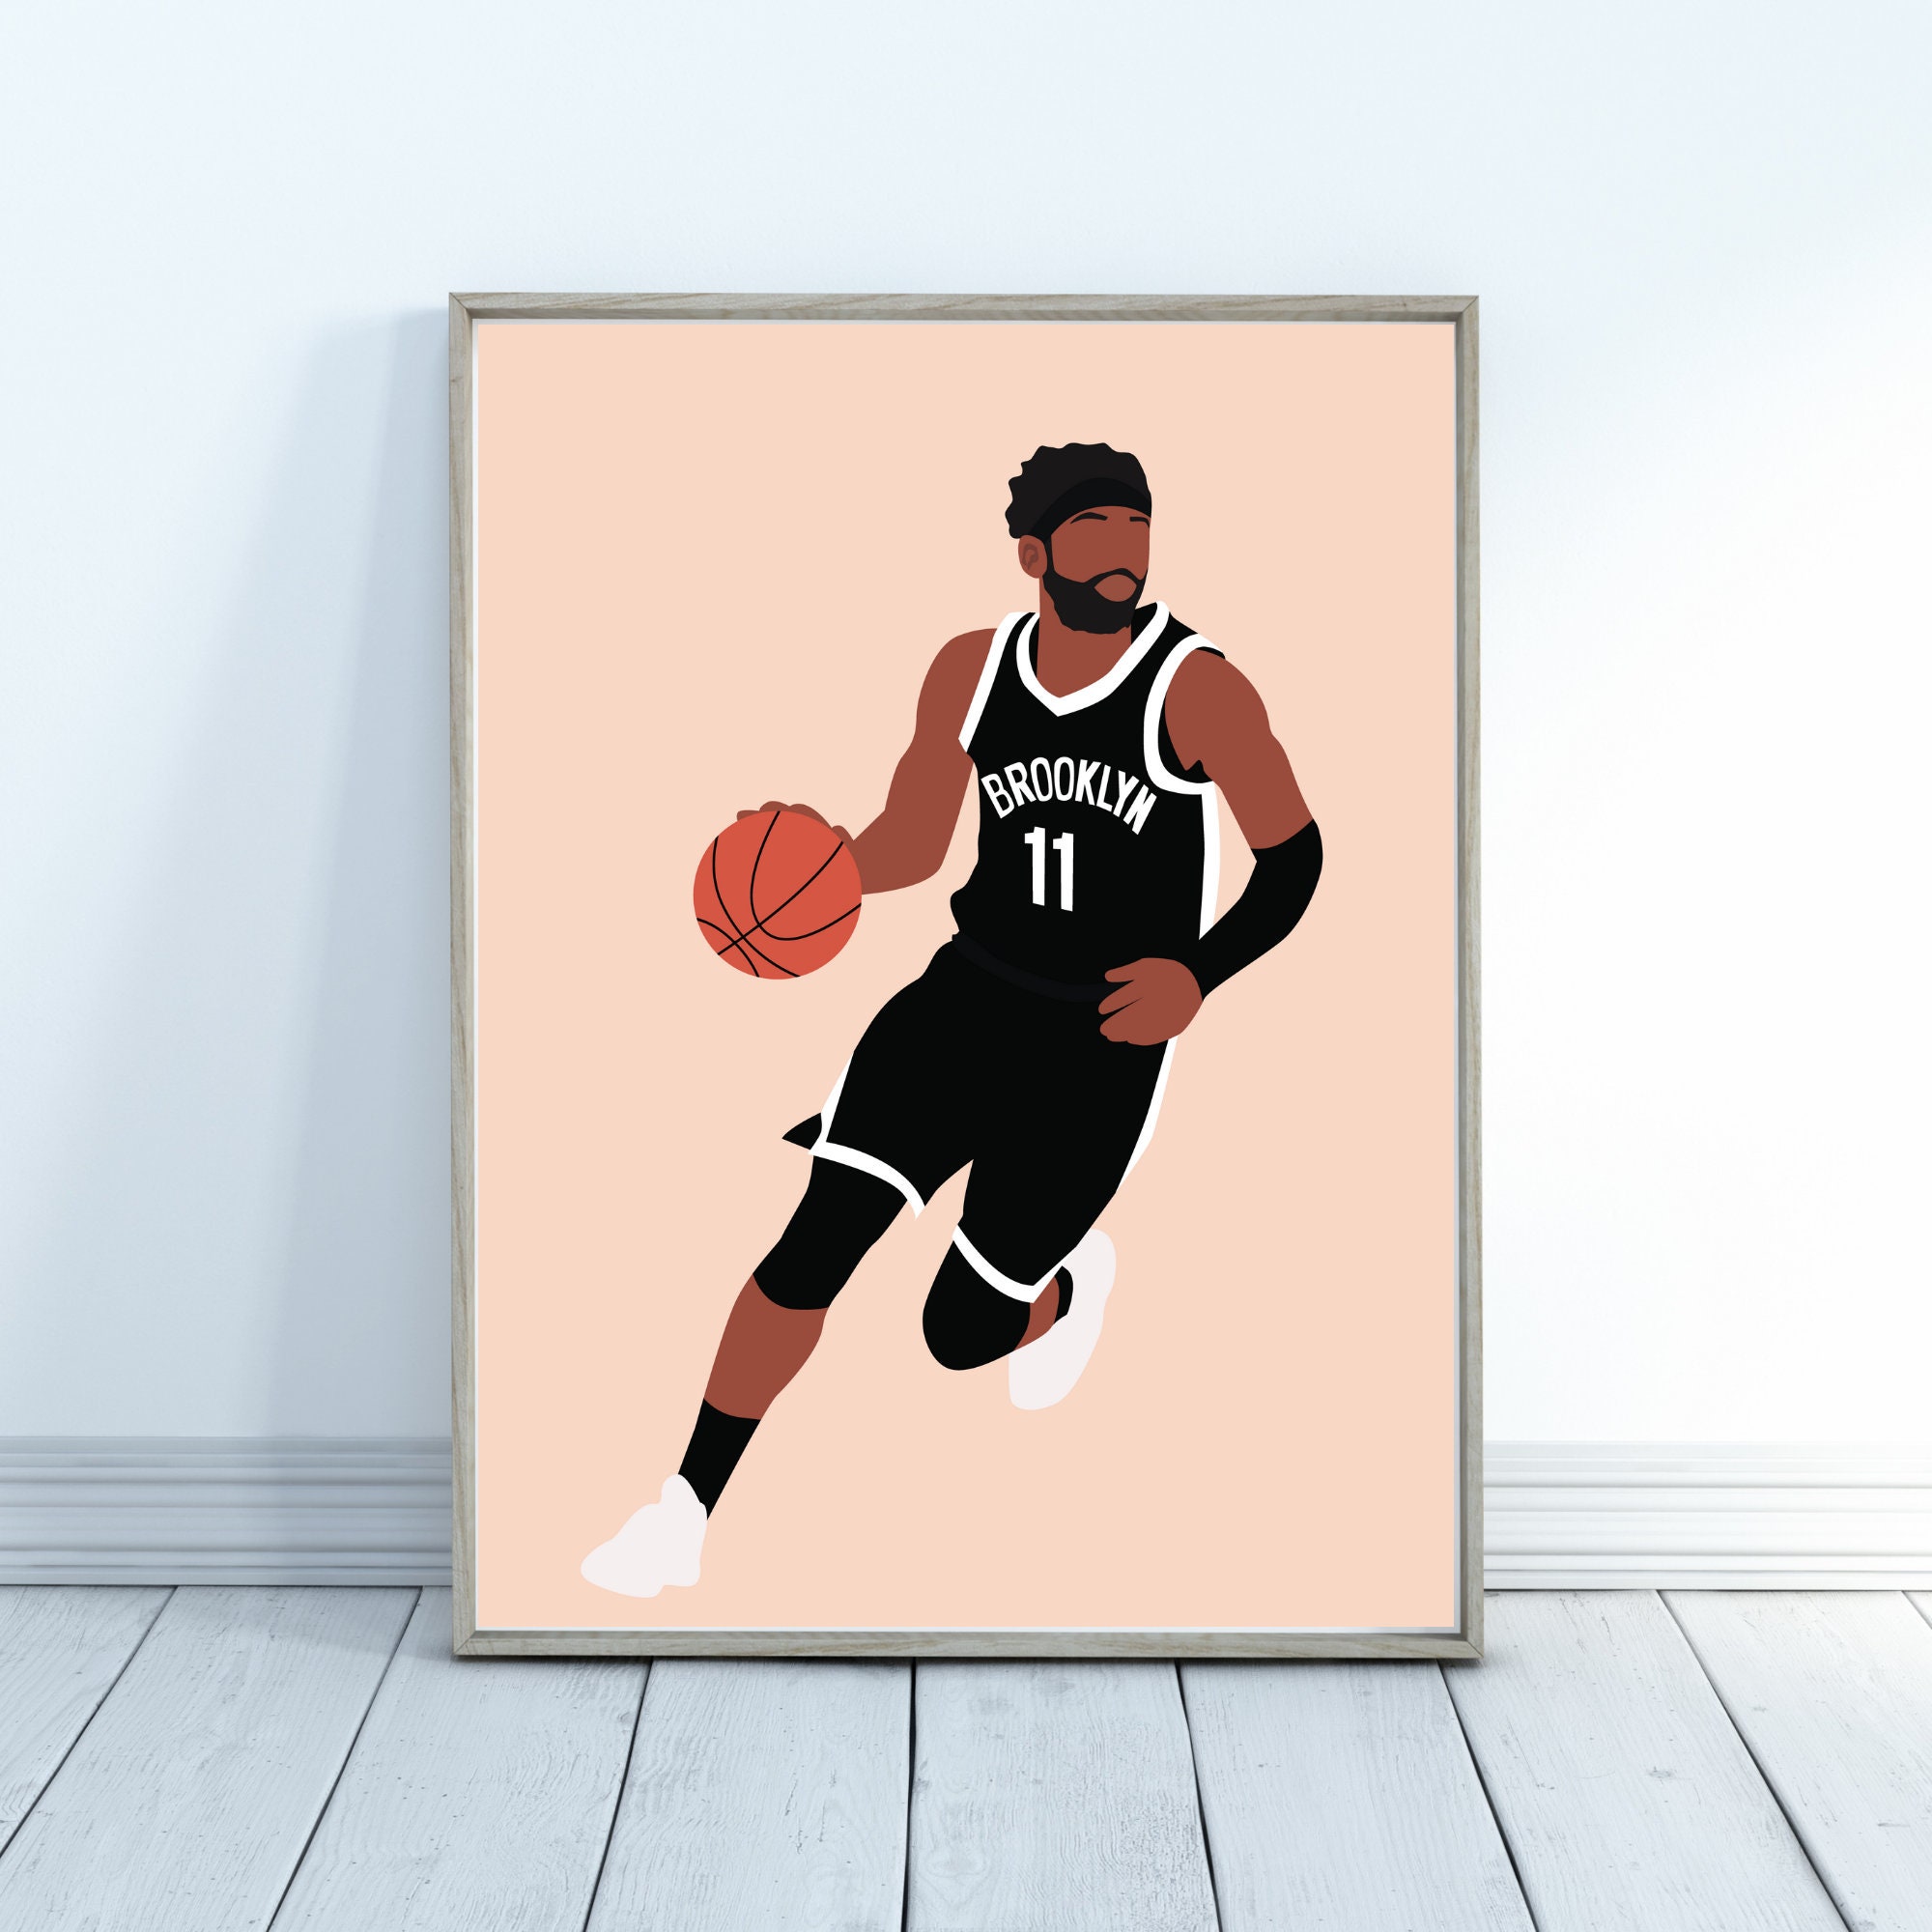 Kyrie Irving Posters for Sale